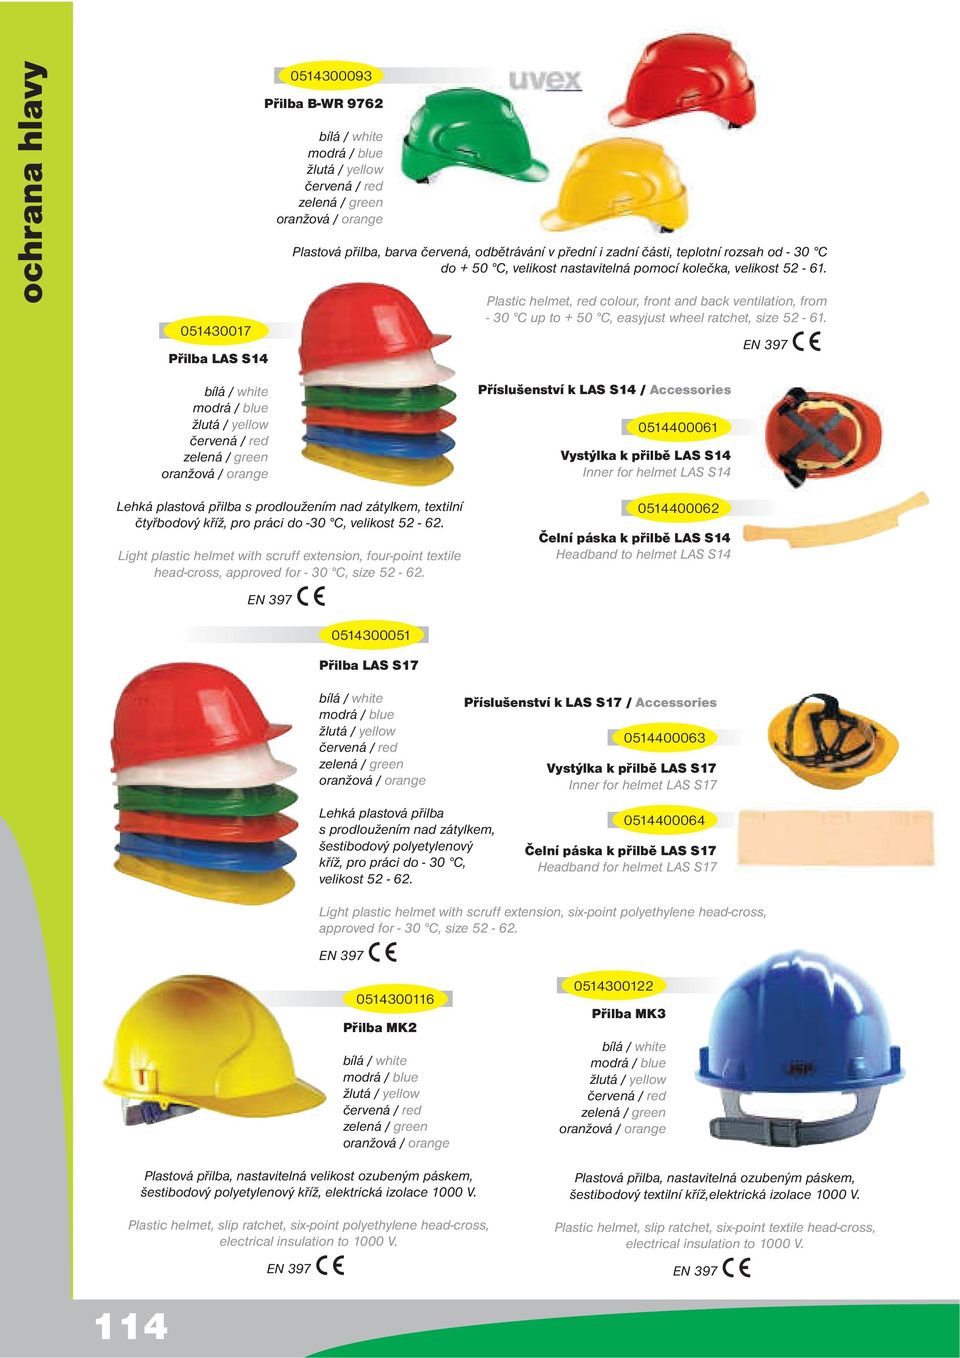 Plastic helmet, red colour, front and back ventilation, from - 30 C up to + 50 C, easyjust wheel ratchet, size 52-61.